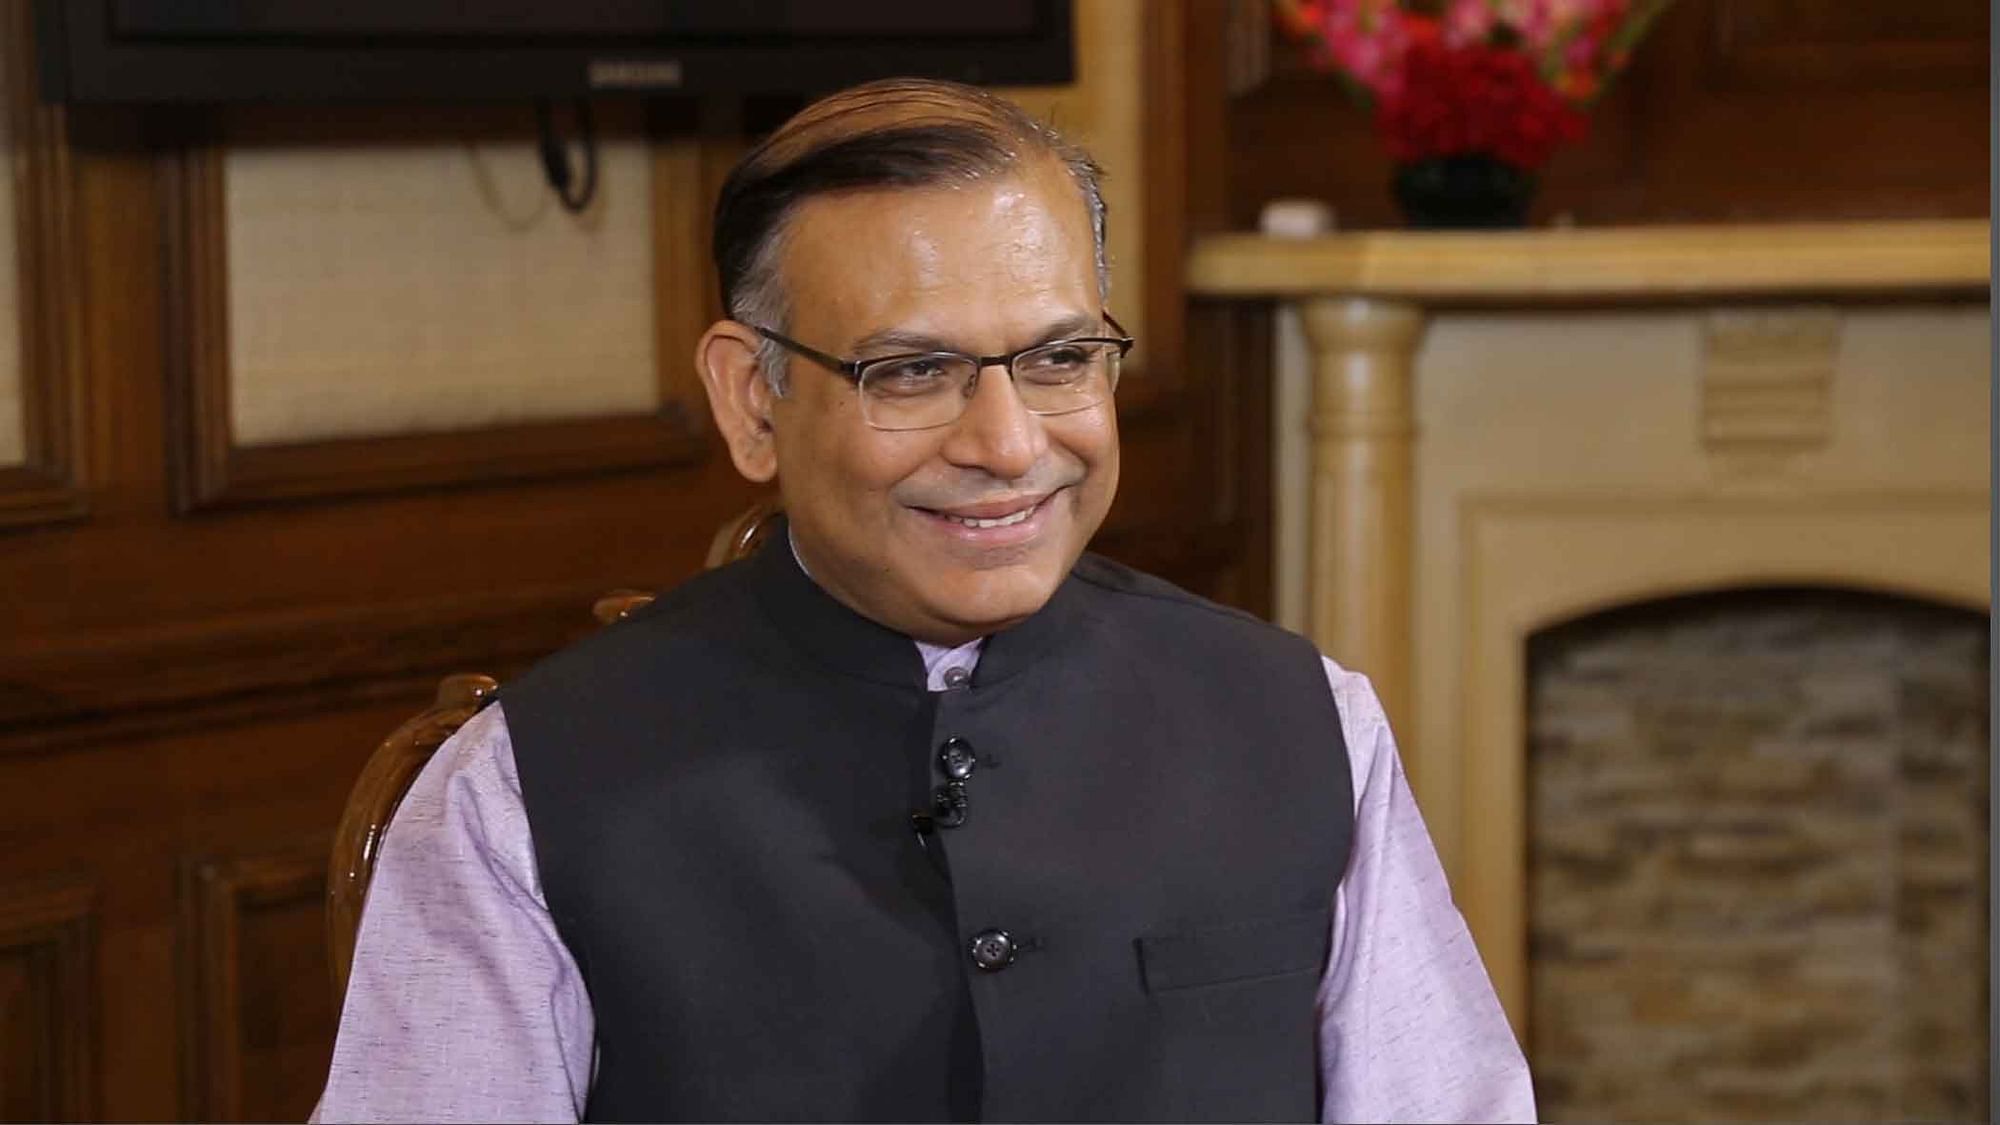 MoS Finance Jayant Sinha in an exclusive interview with The Quint.